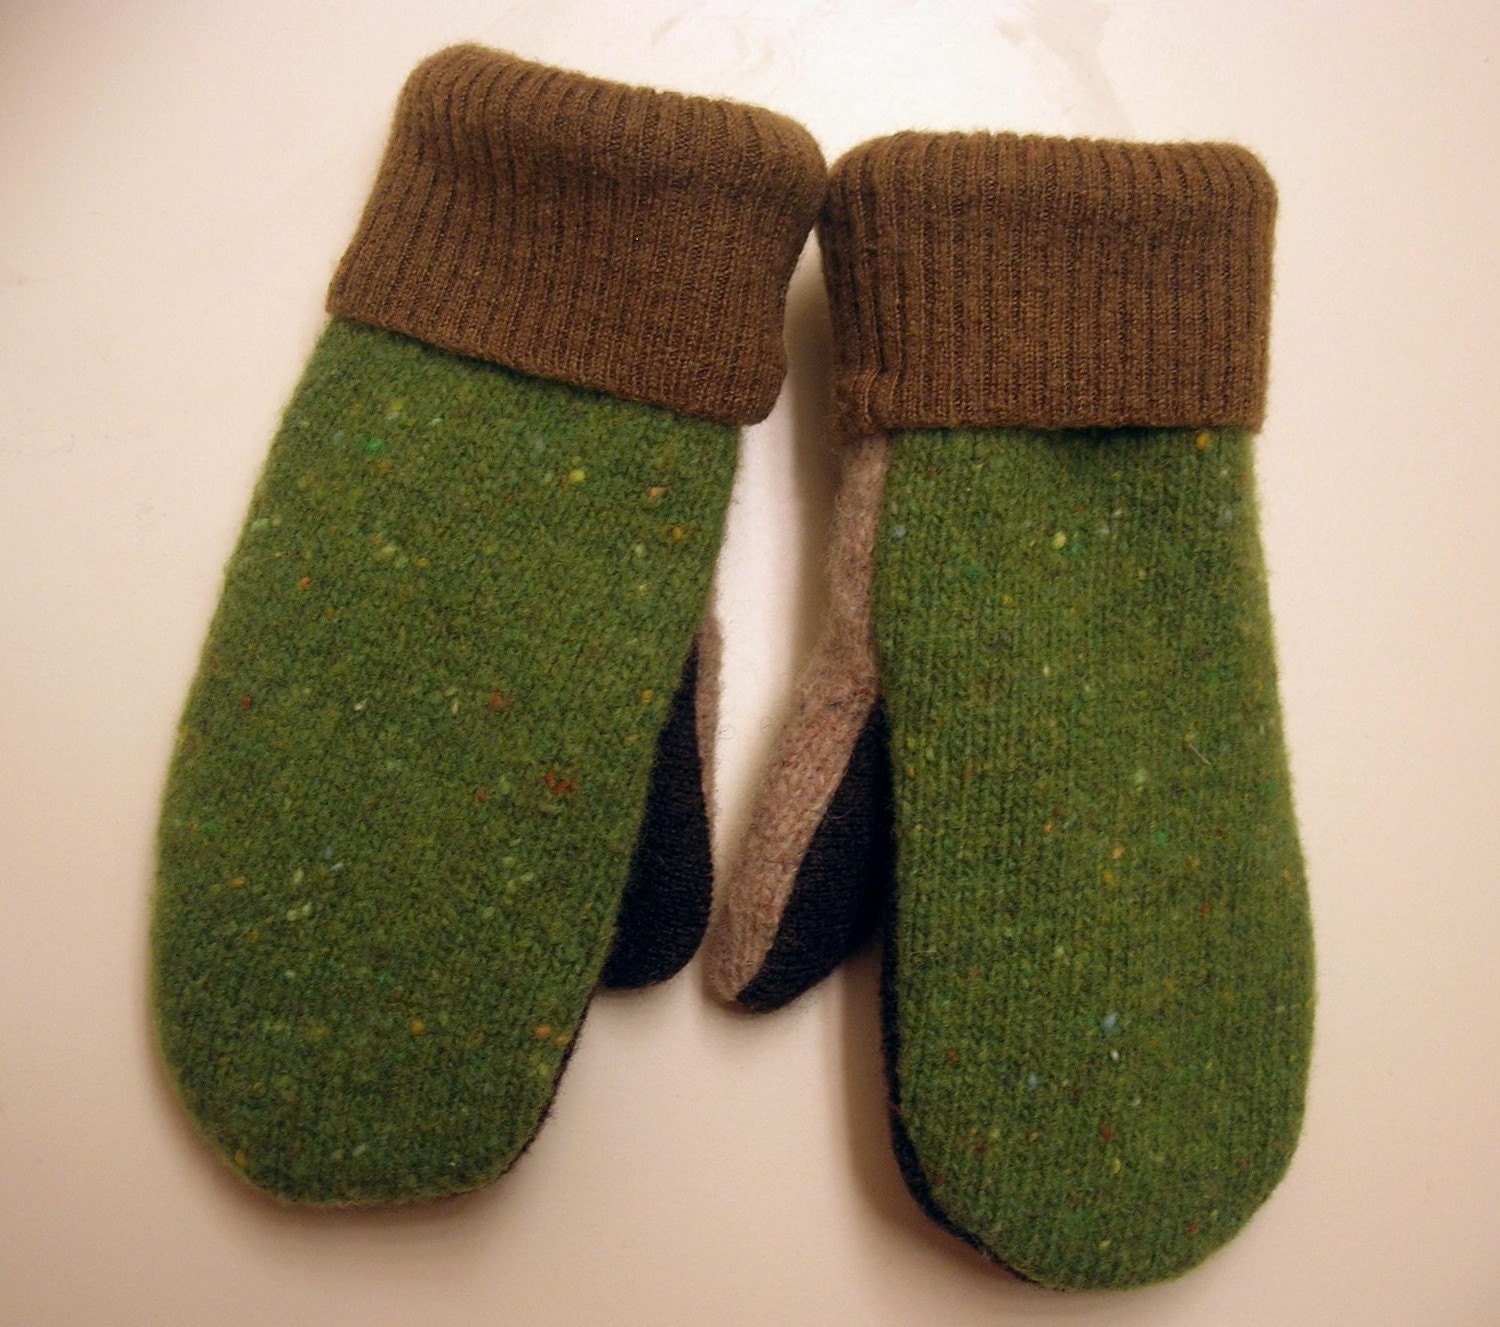 Kids Camo Felted Wool Mittens lined